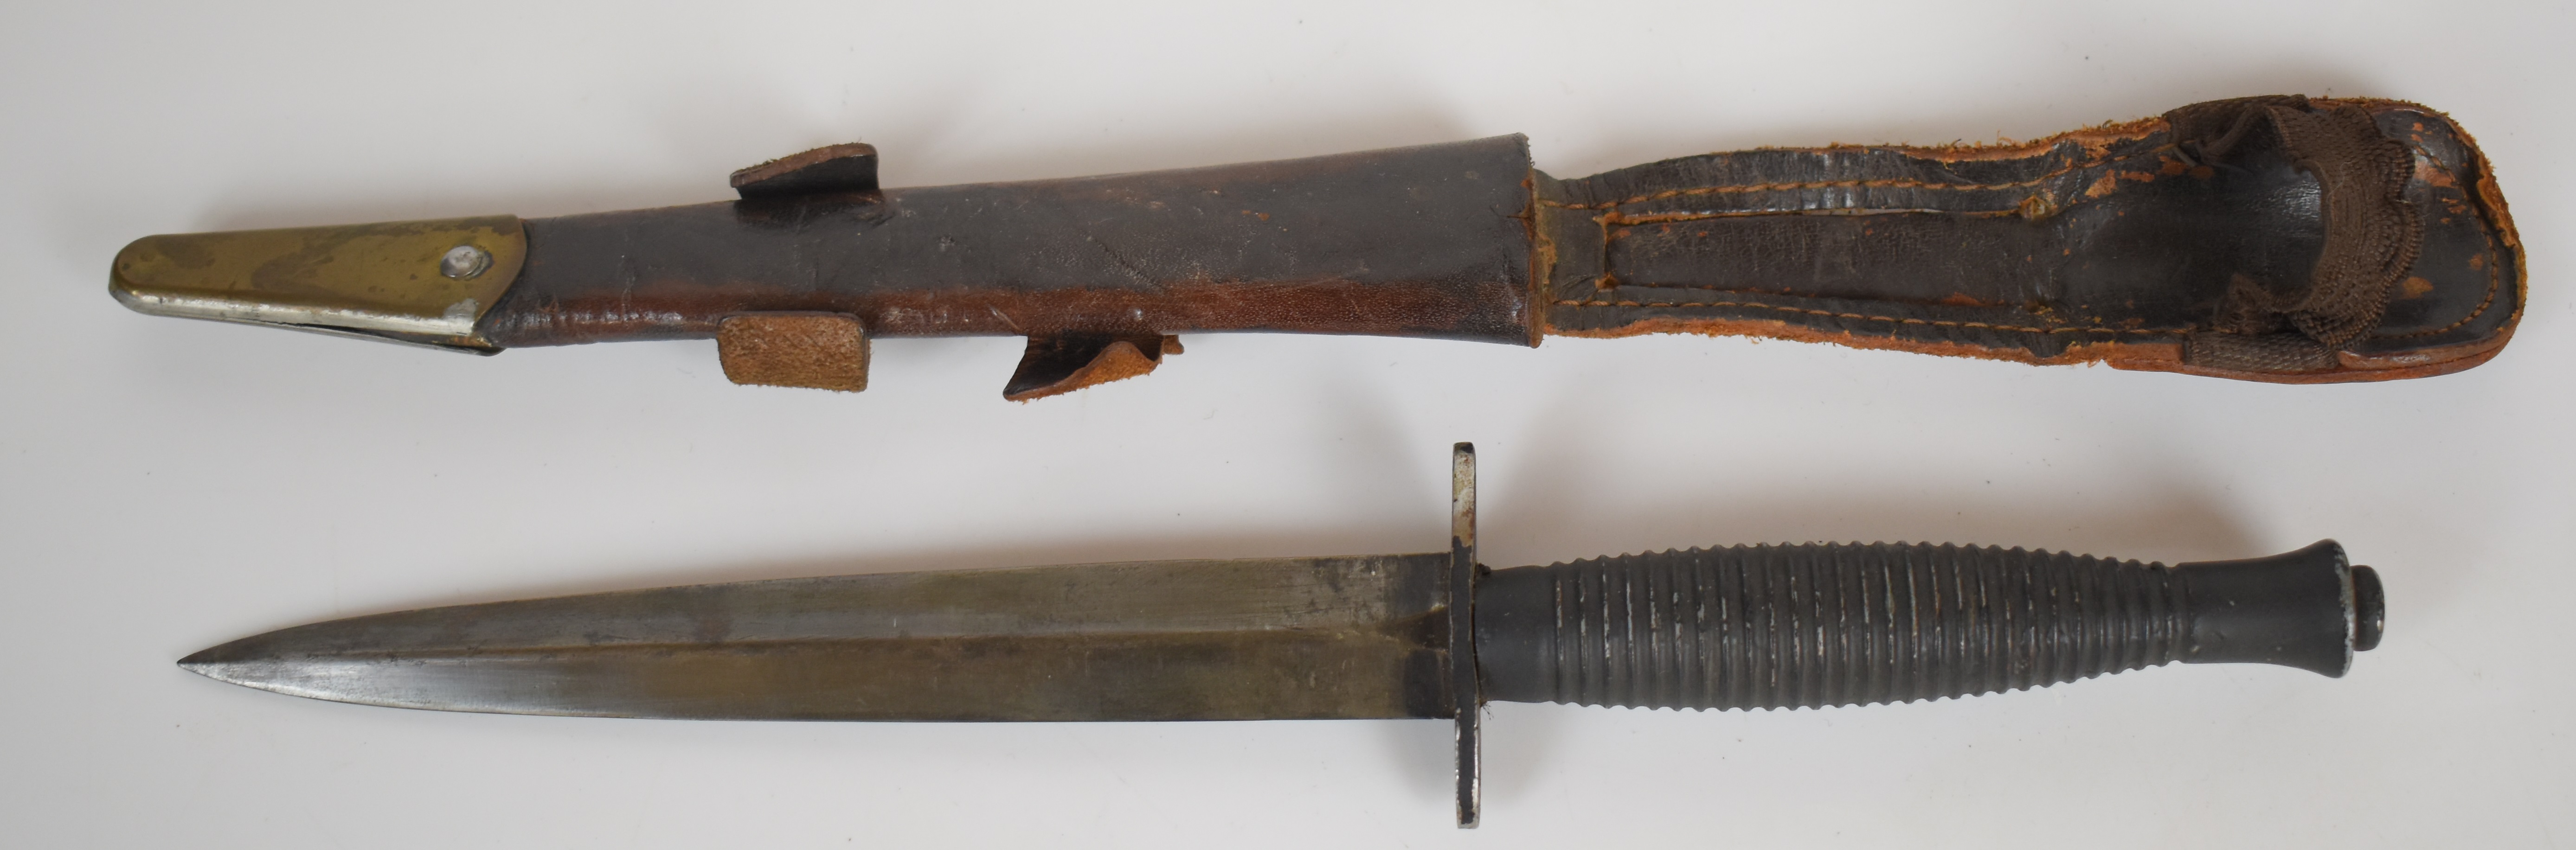 British WW2 Fairbairn Sykes 3rd pattern fighting knife stamped with broad arrow mark and B2, with - Image 3 of 4